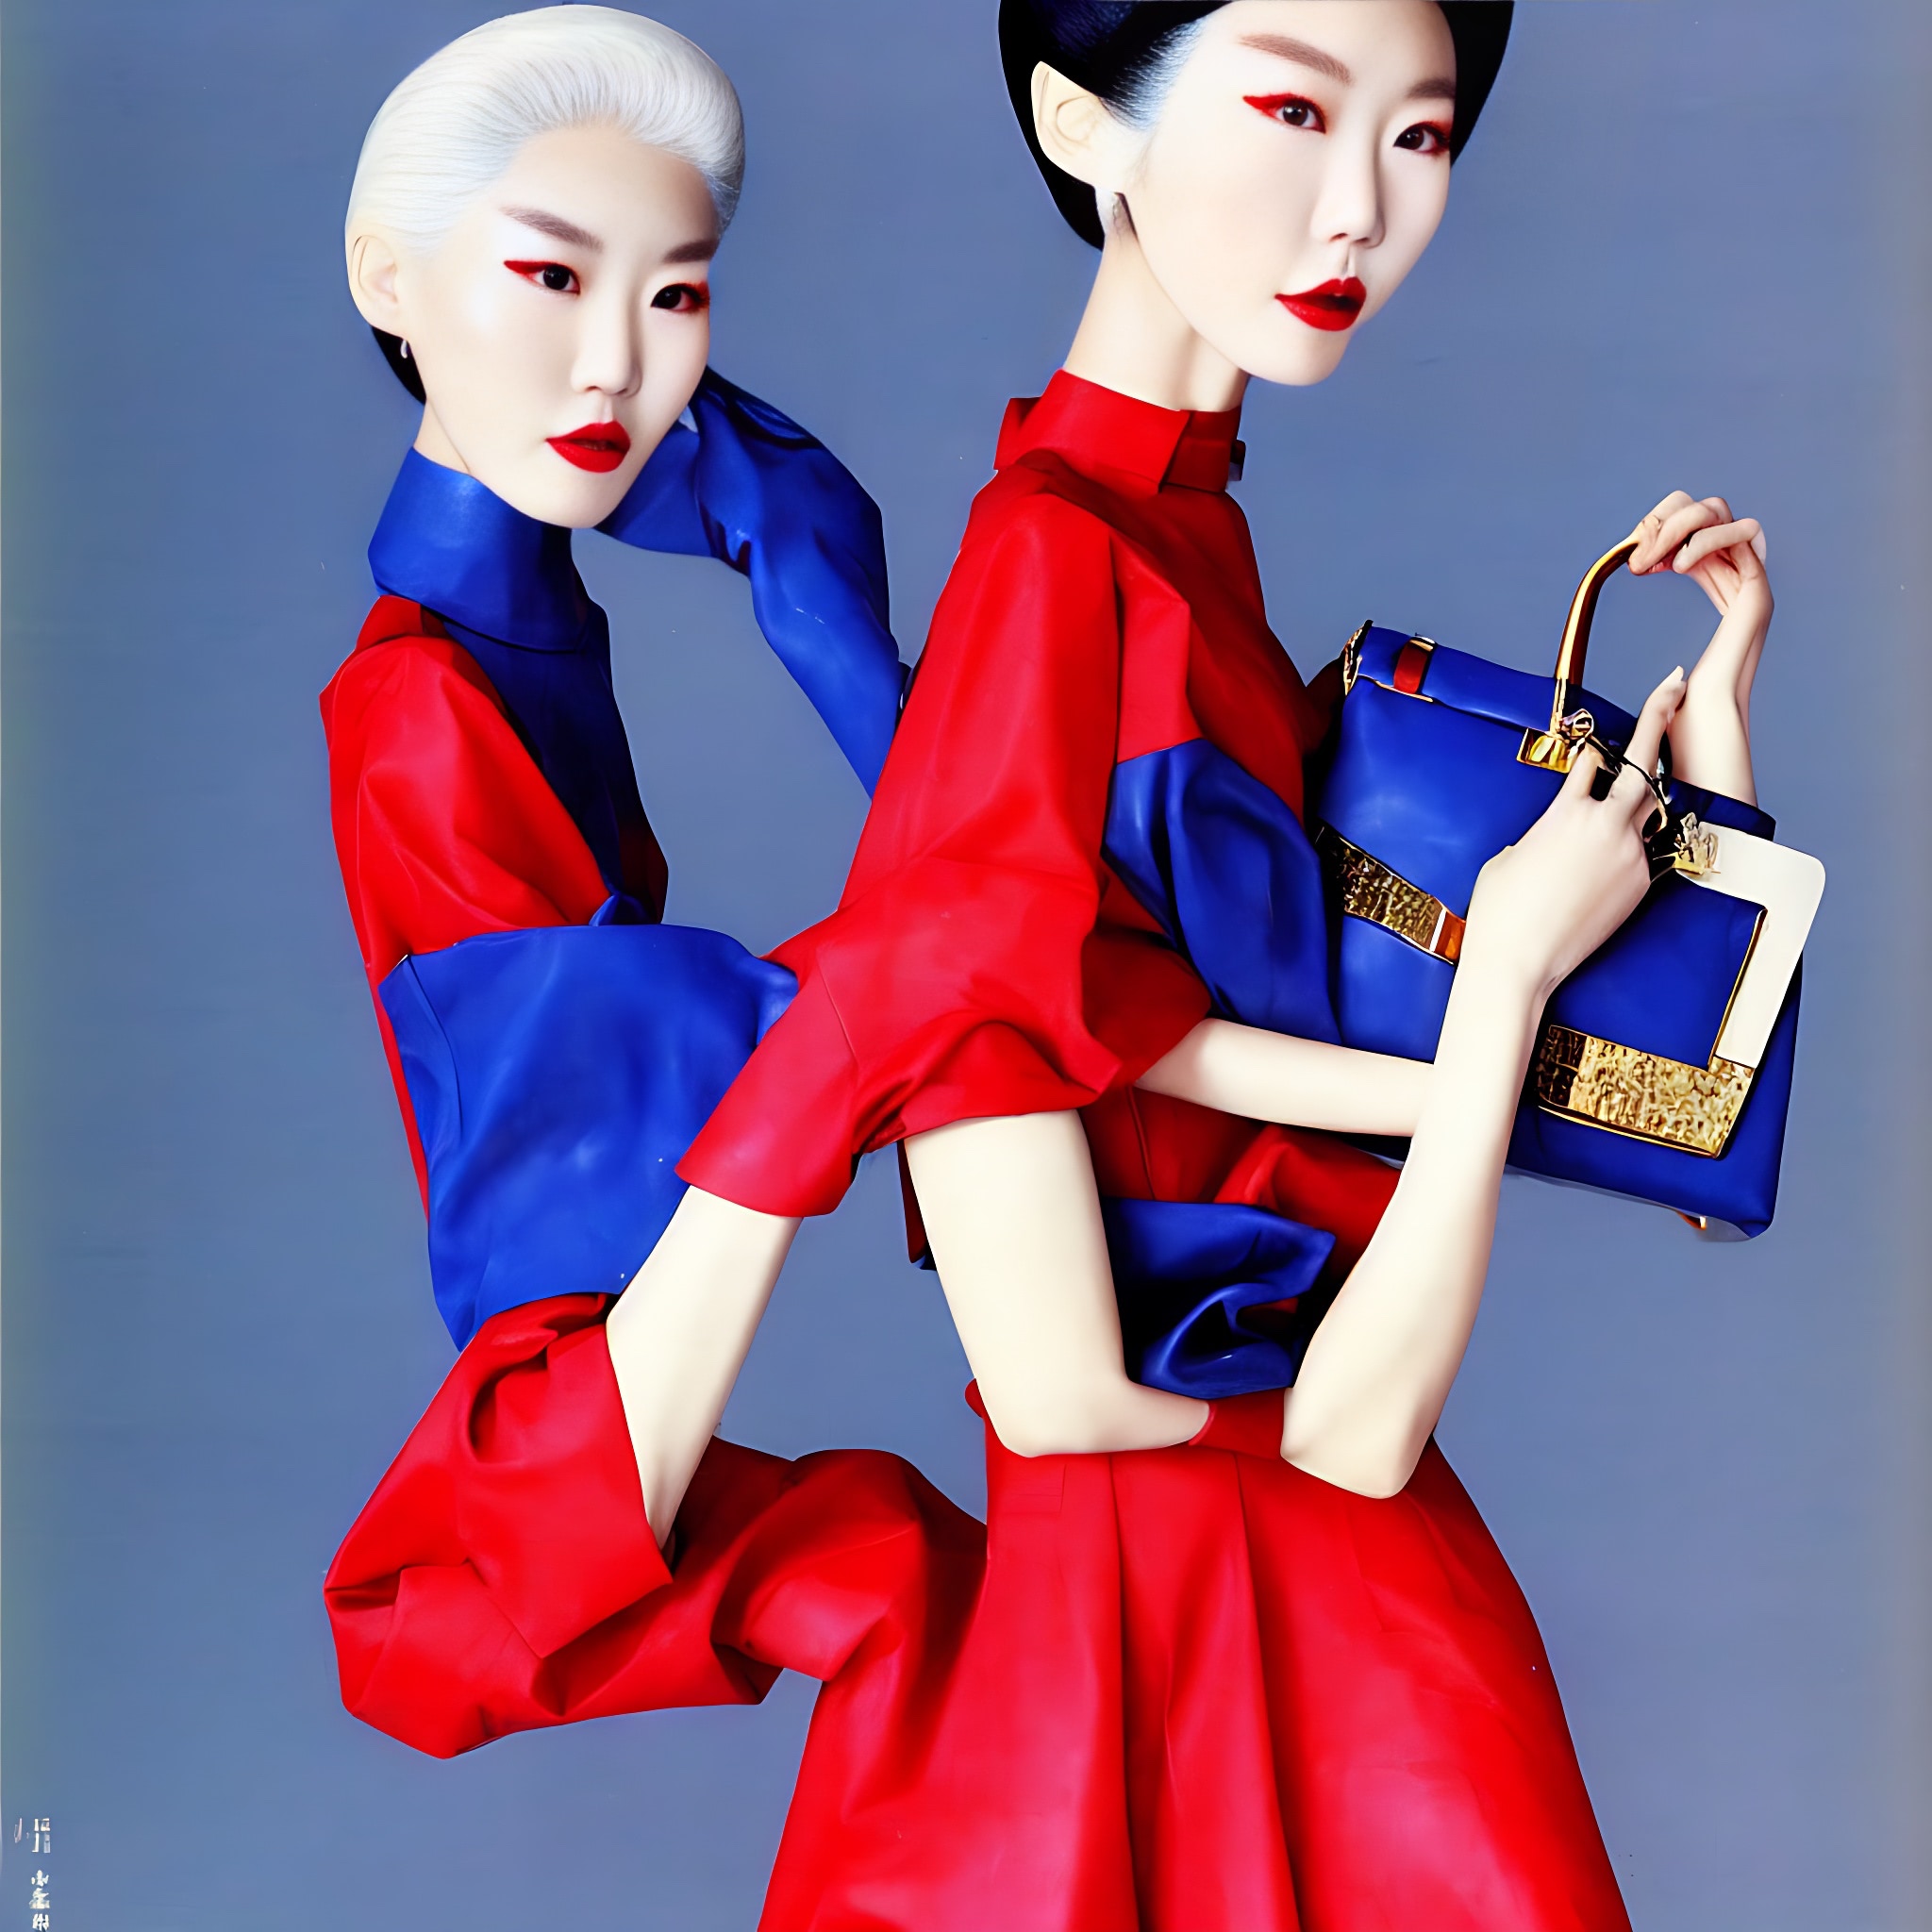 Korean_model_in_a_1980s_French_dress_with_white_hair